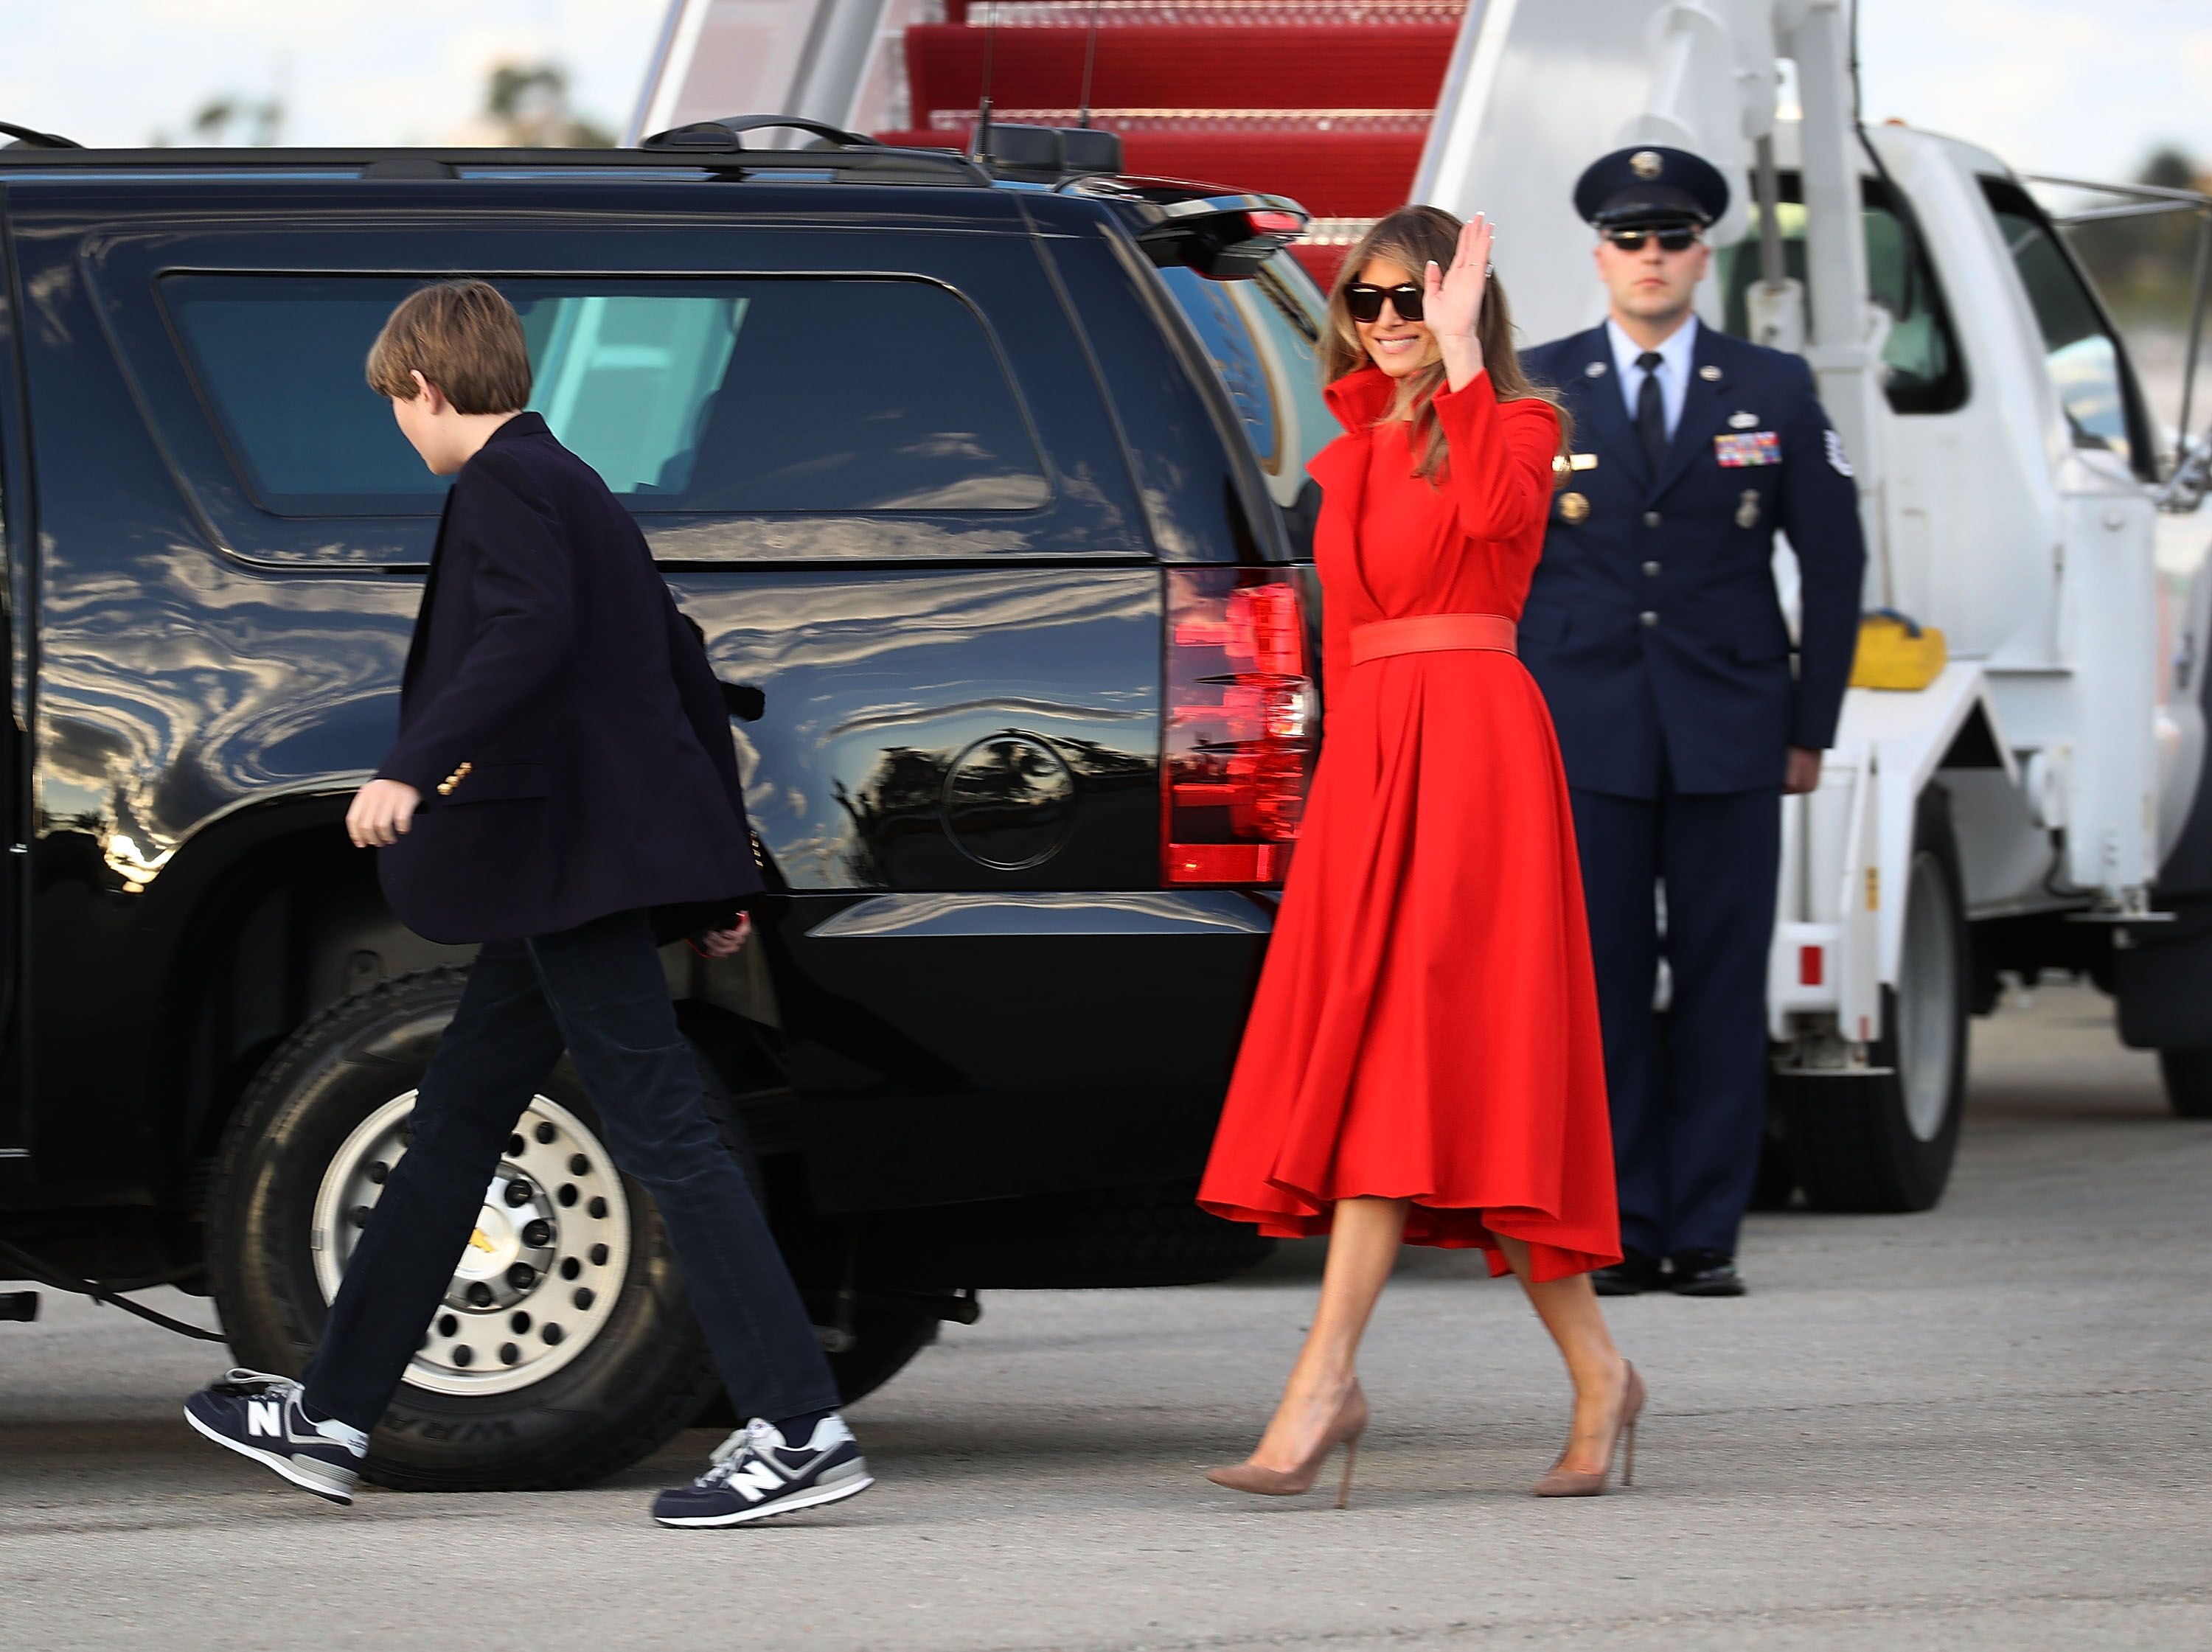 Melania Trump and her son, Barron Trump arriving on Air Force One at the Palm Beach International Airport in 2017 | Source: Getty Images